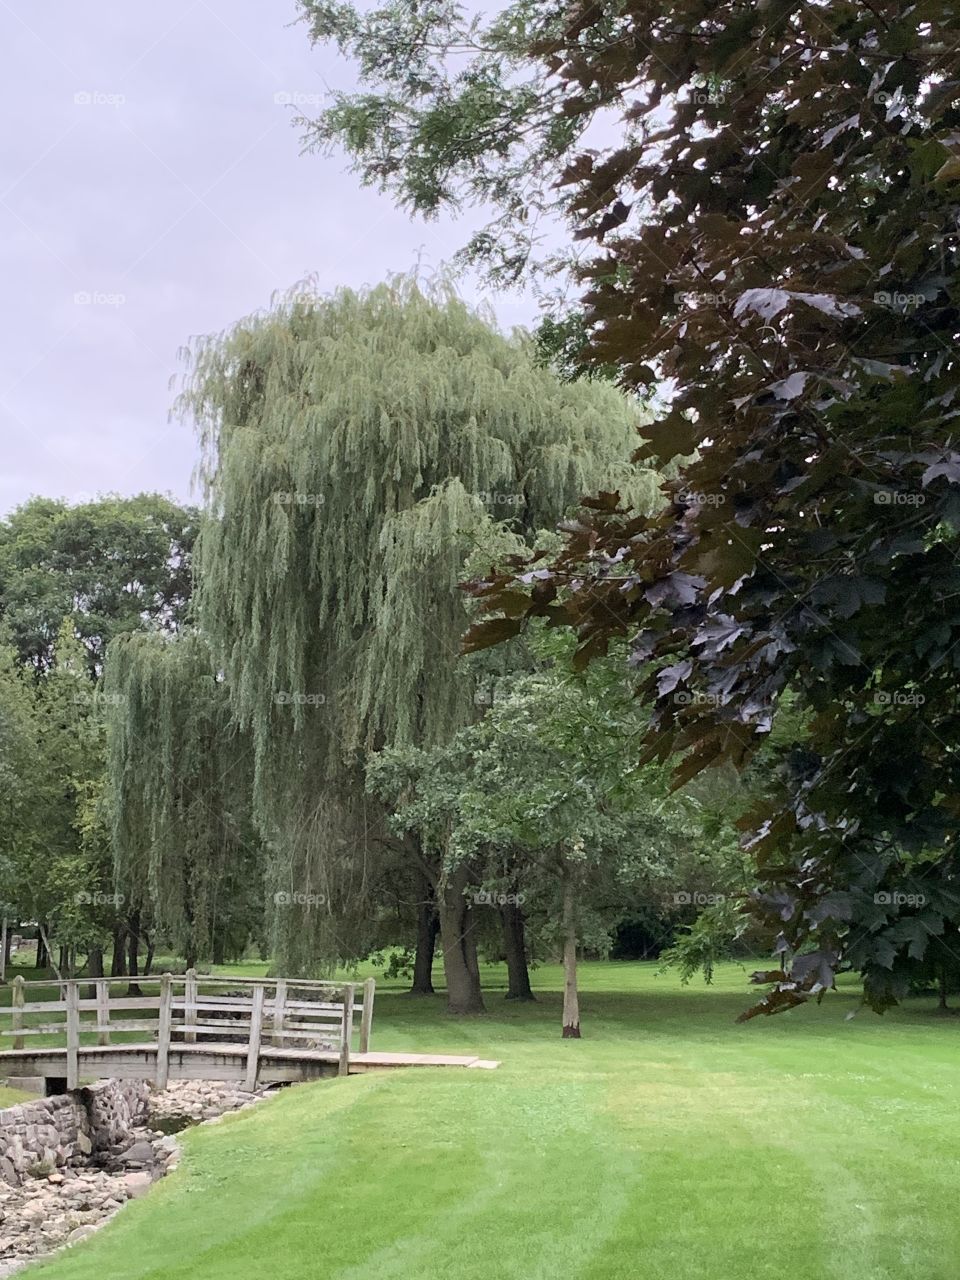 Weeping willow on a cloudy day